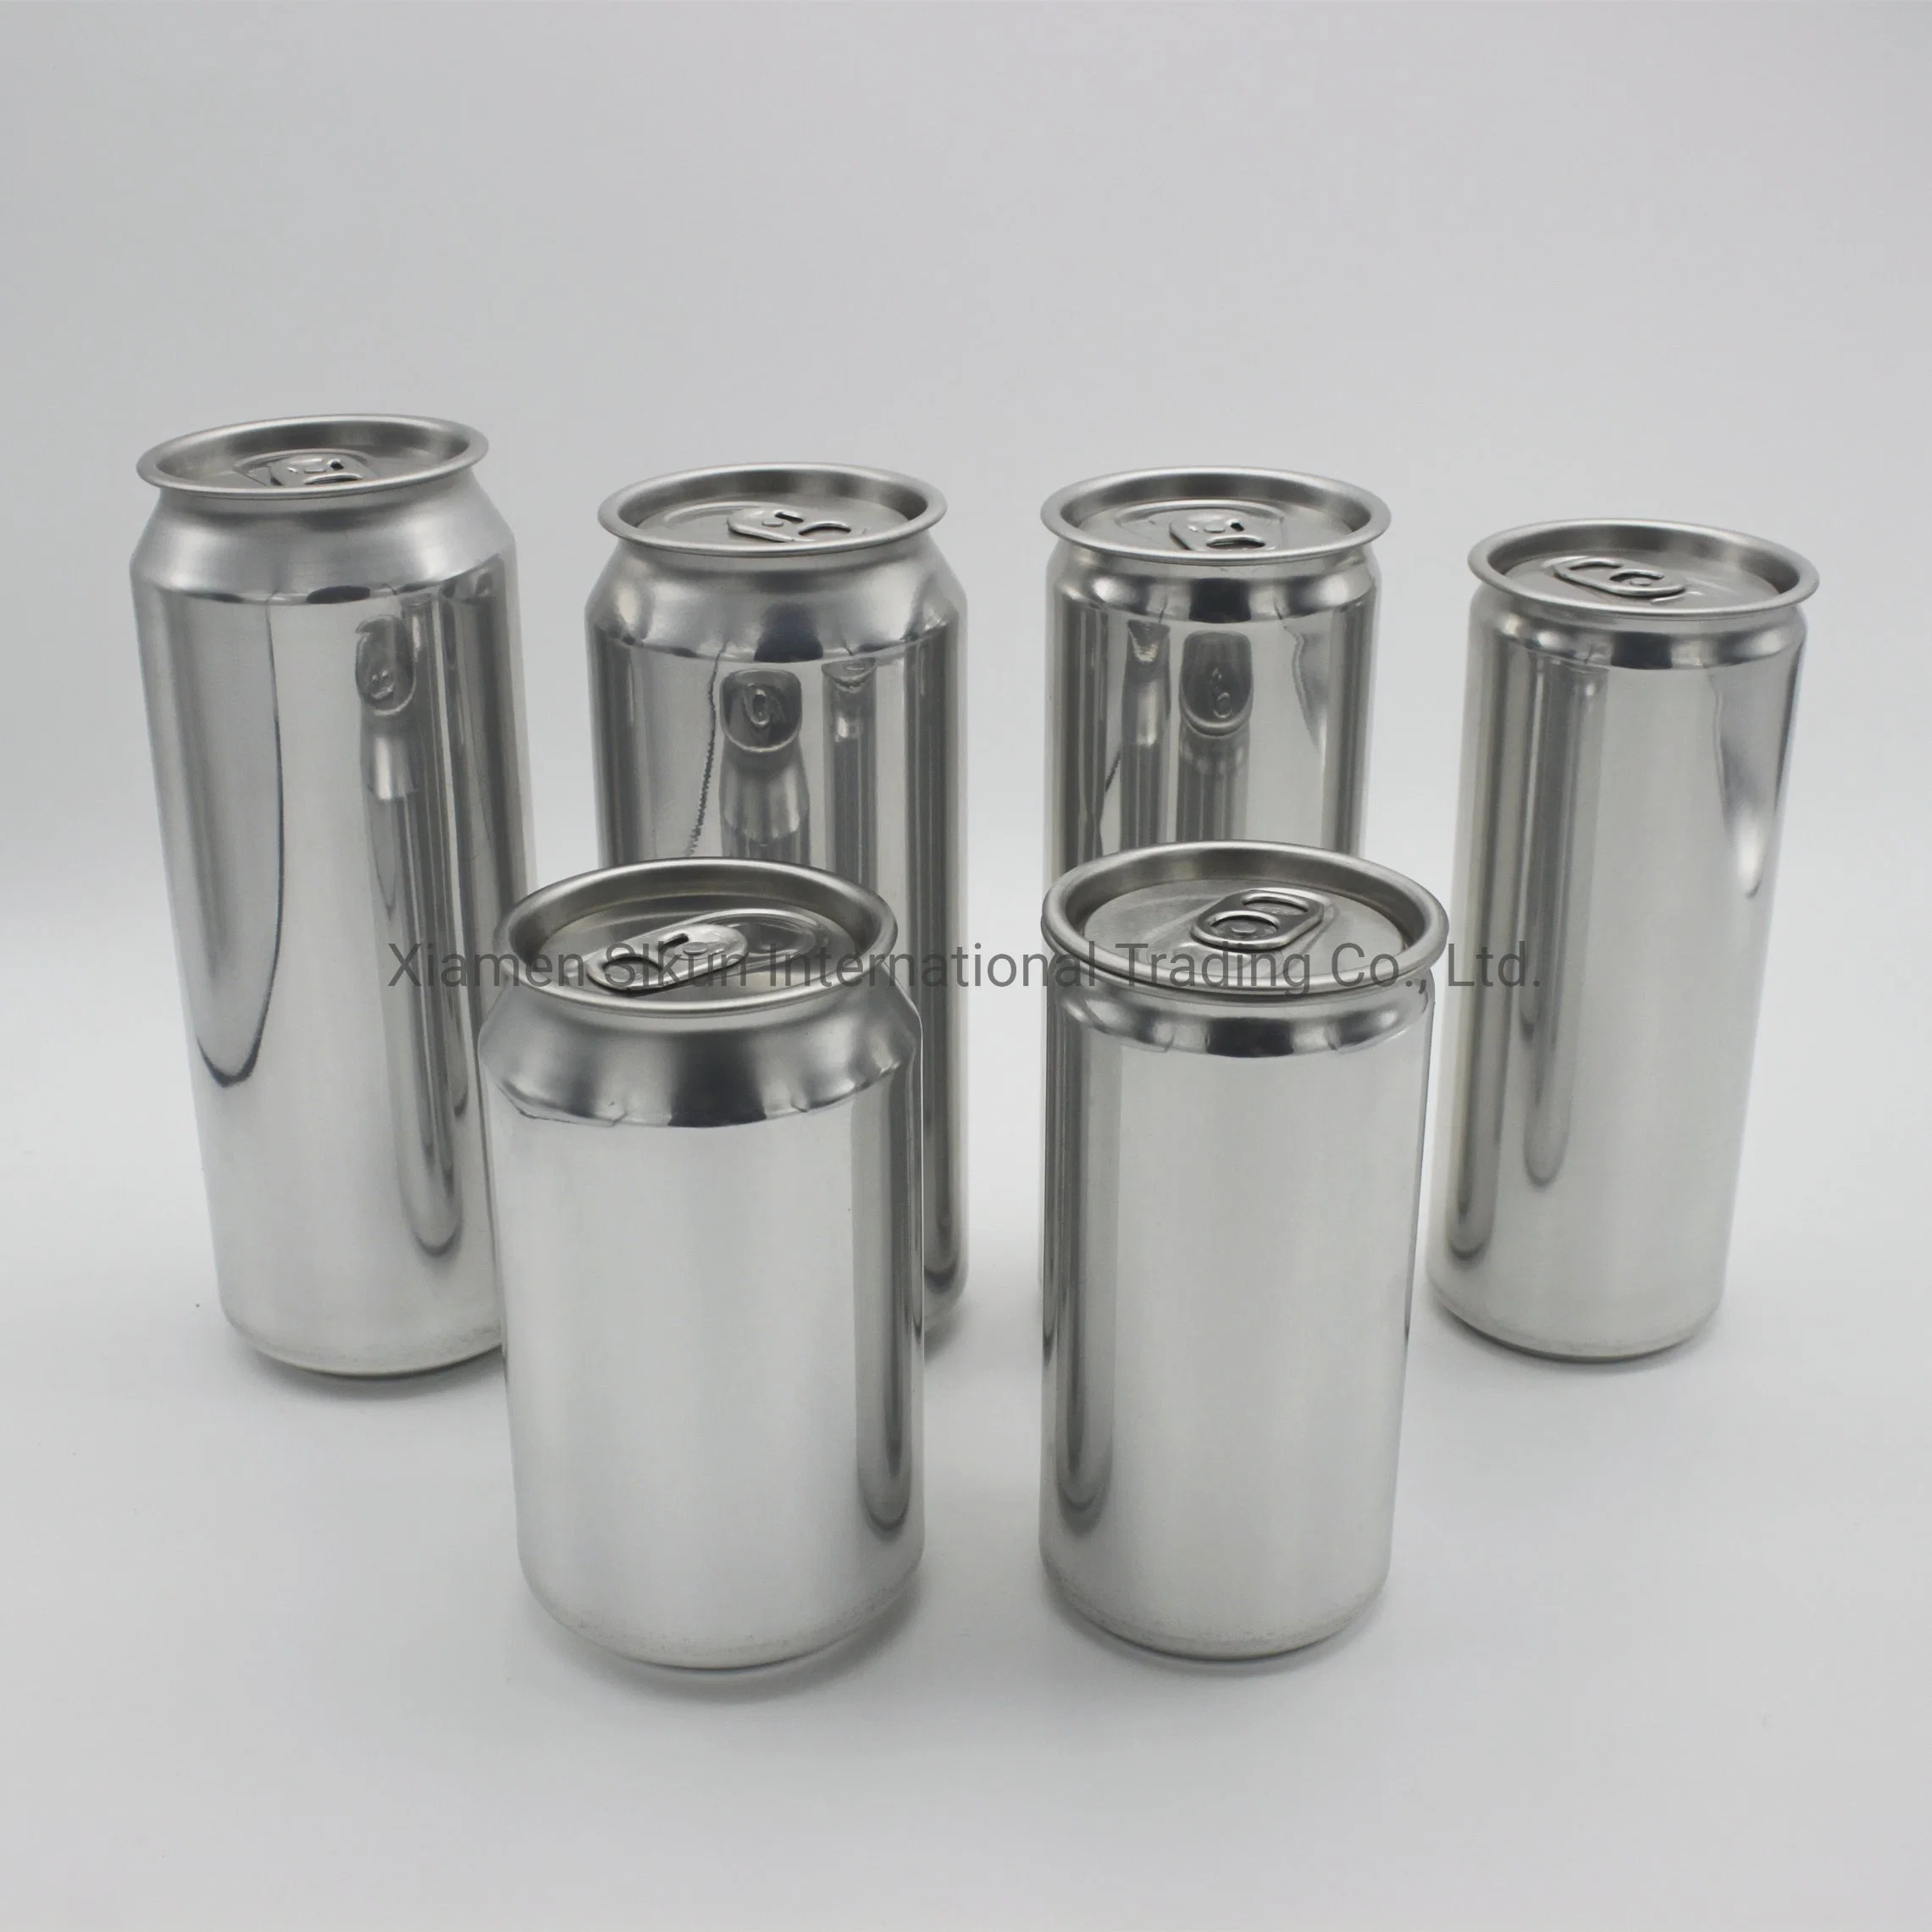 Hot Sale Beverage Can 330ml Aluminum Can for Juice Soda Drinks Packaging